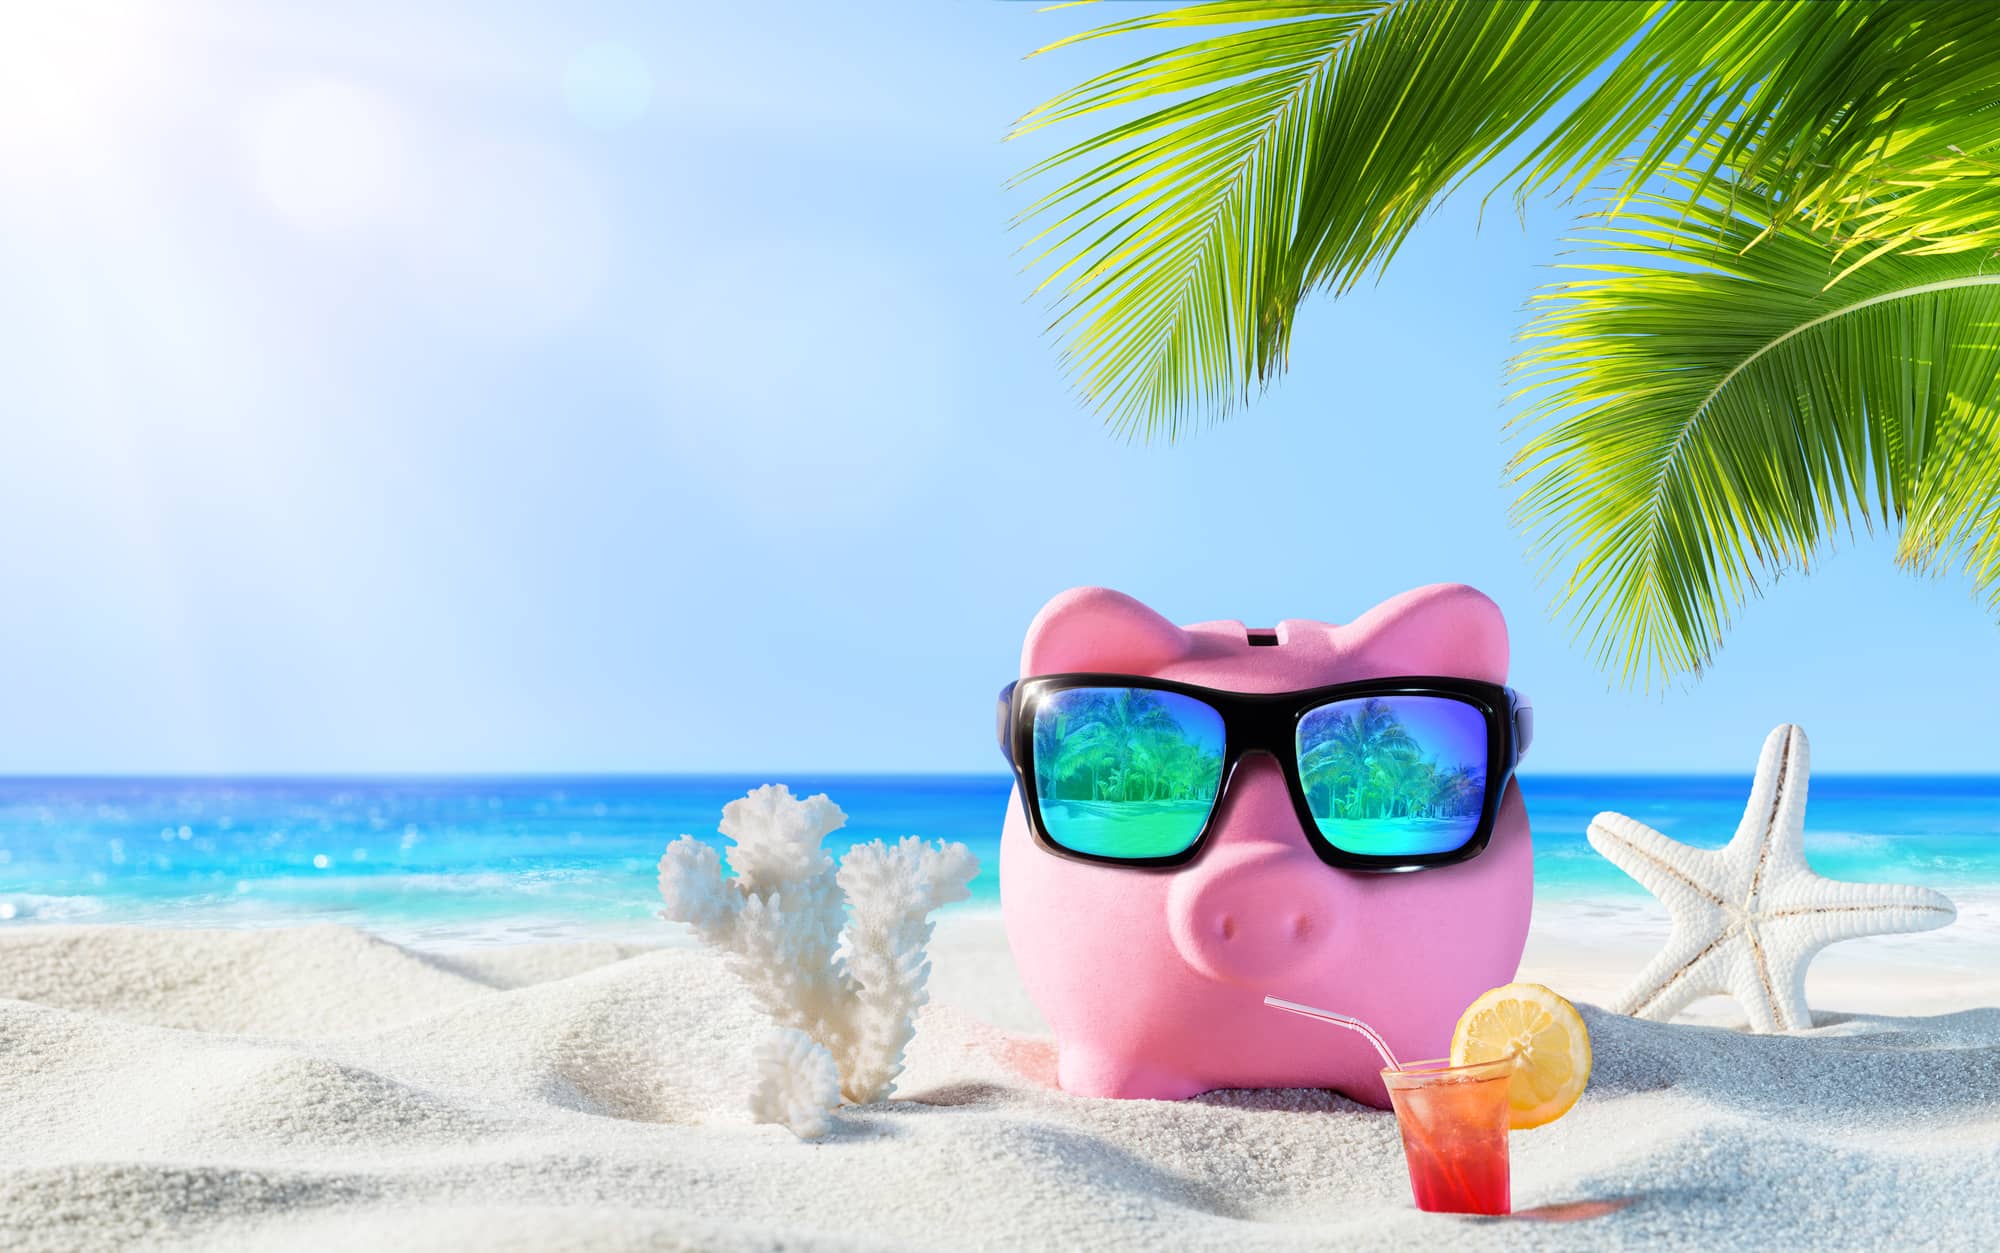 Piggy bank wearing sunglasses and hanging out on the beach with a cold drink.